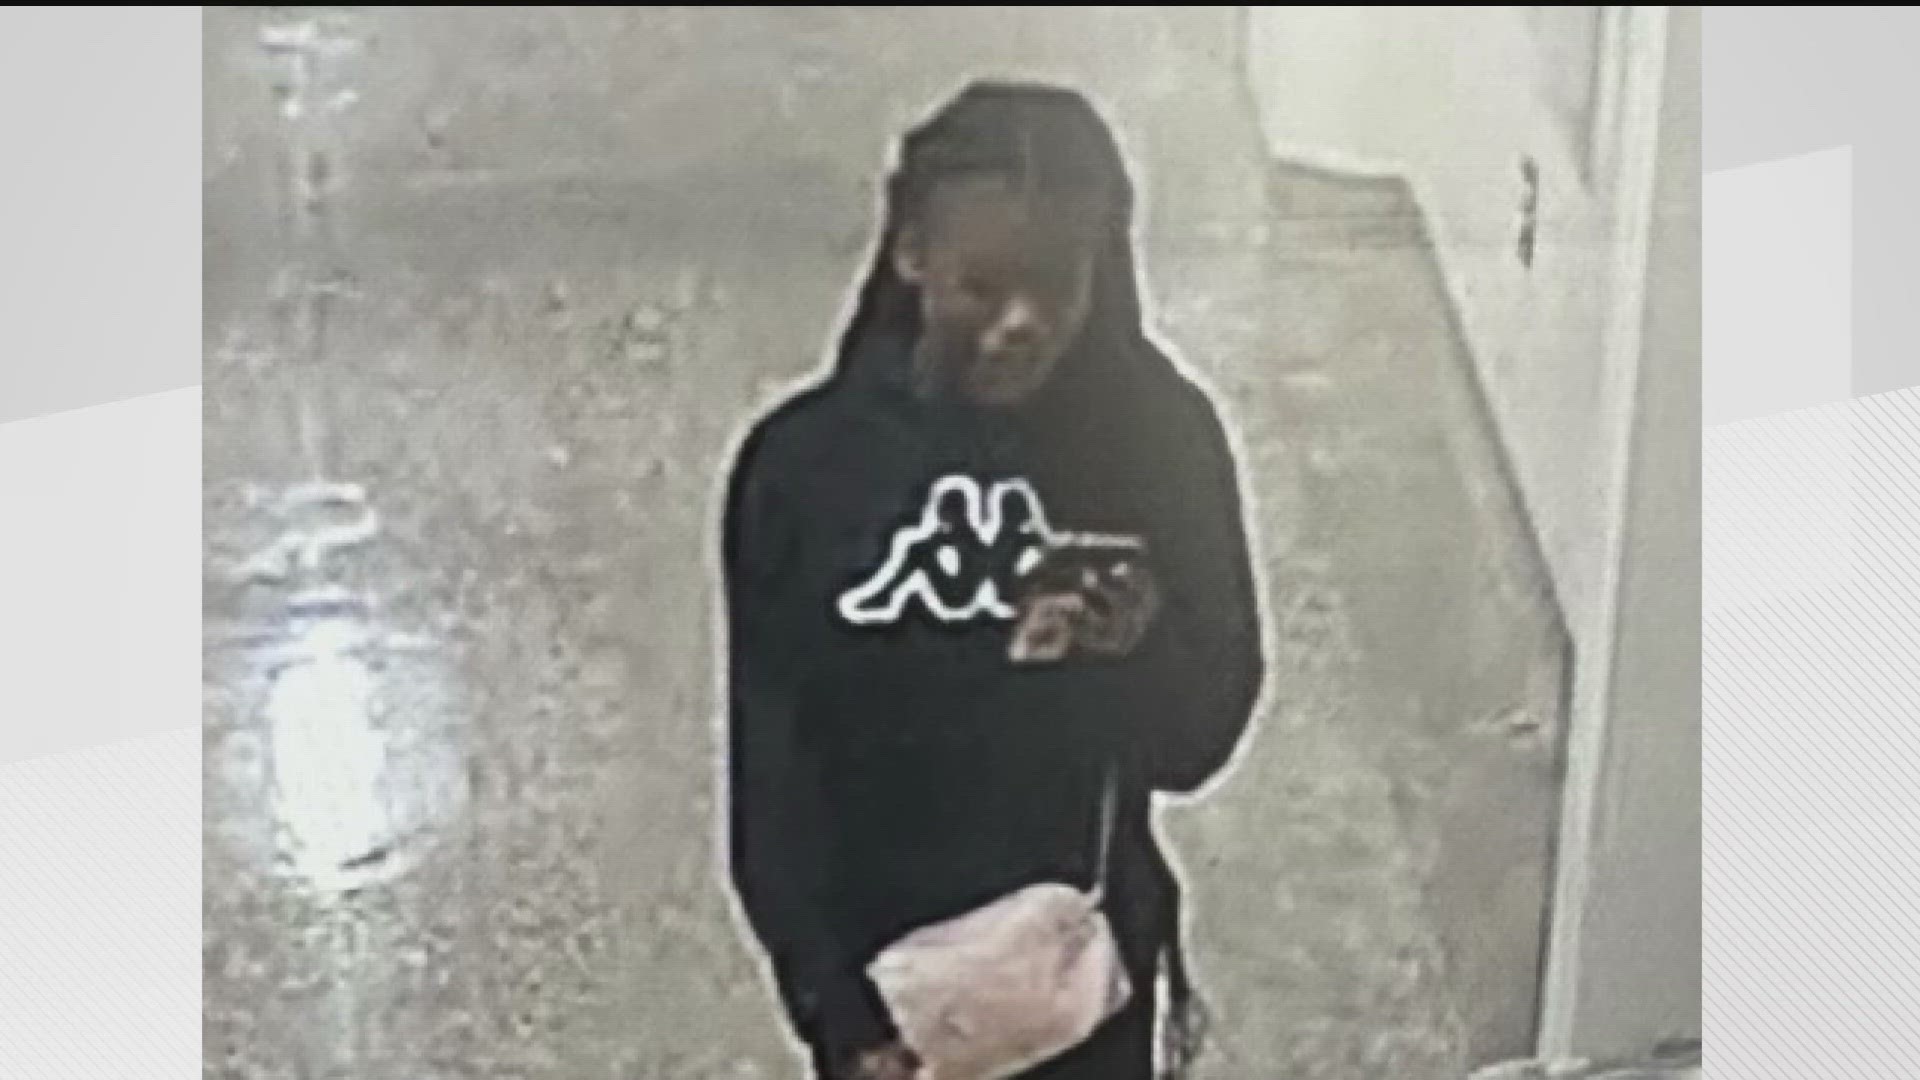 Adijah Little was spotted walking out of David T. Howard Middle School just before 1 p.m. on the school's security cameras.